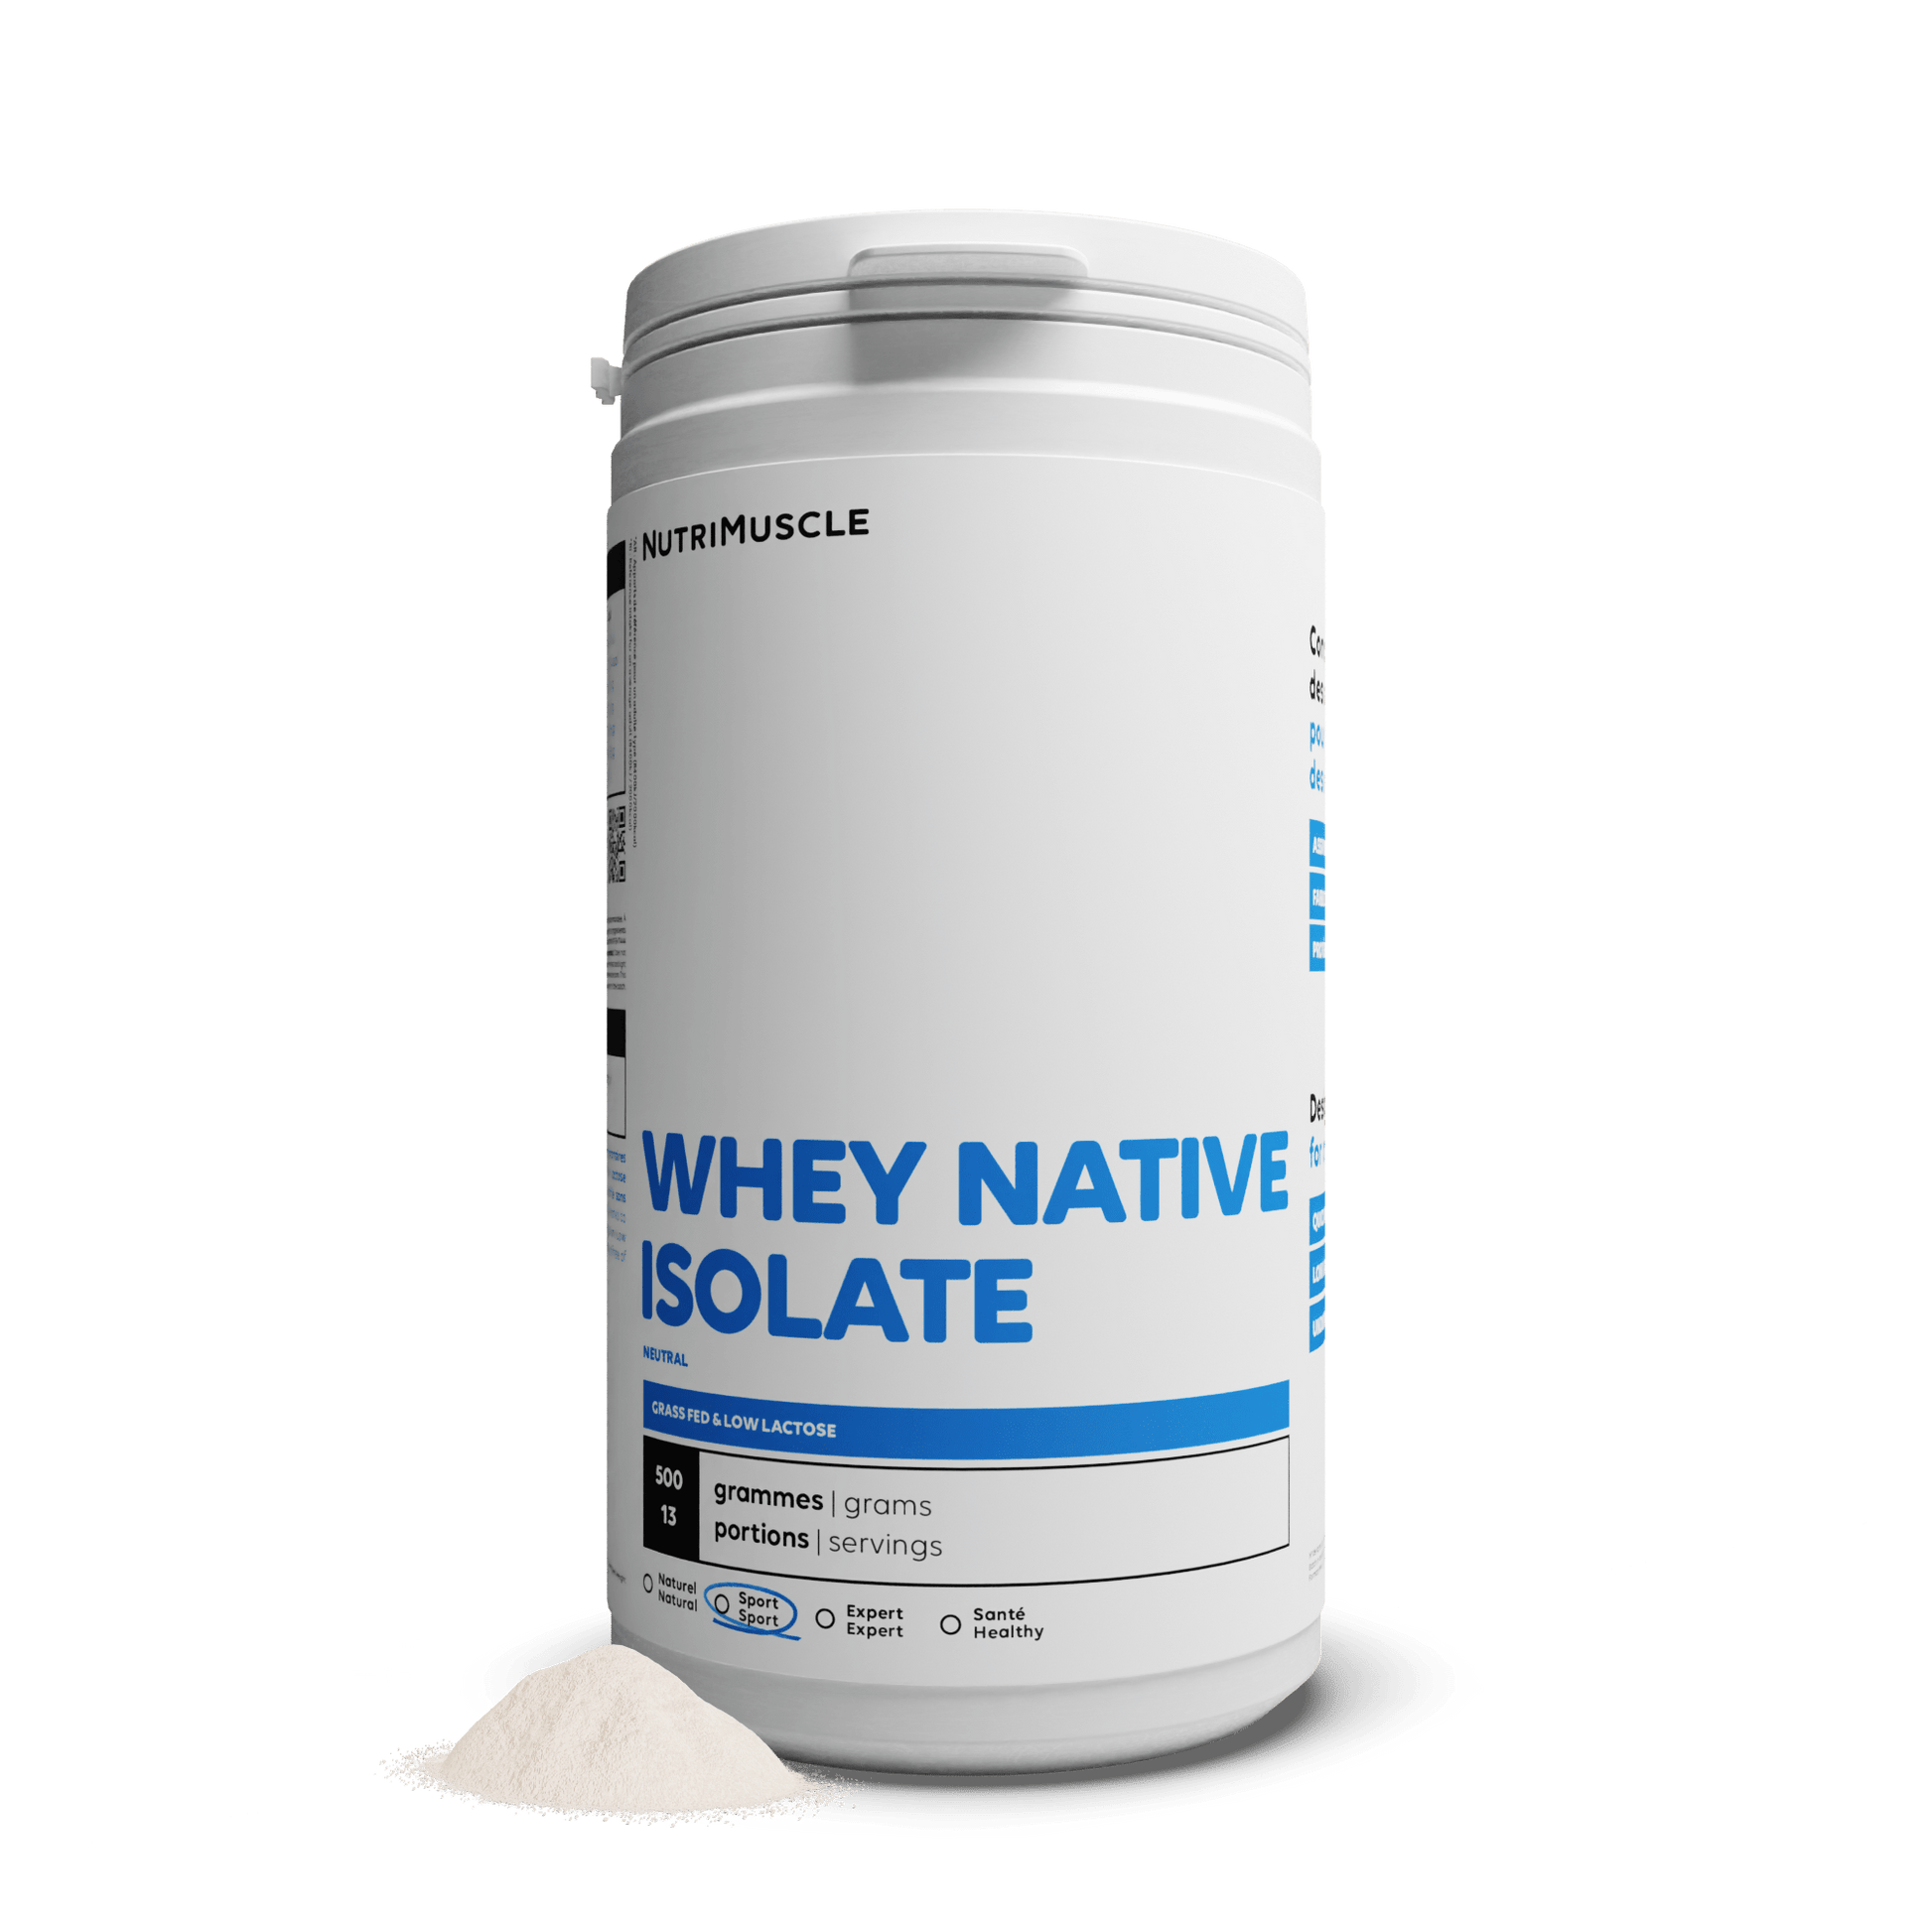 Nutrimuscle Protéines Nature / 500 g Whey Native Isolate (Low lactose)